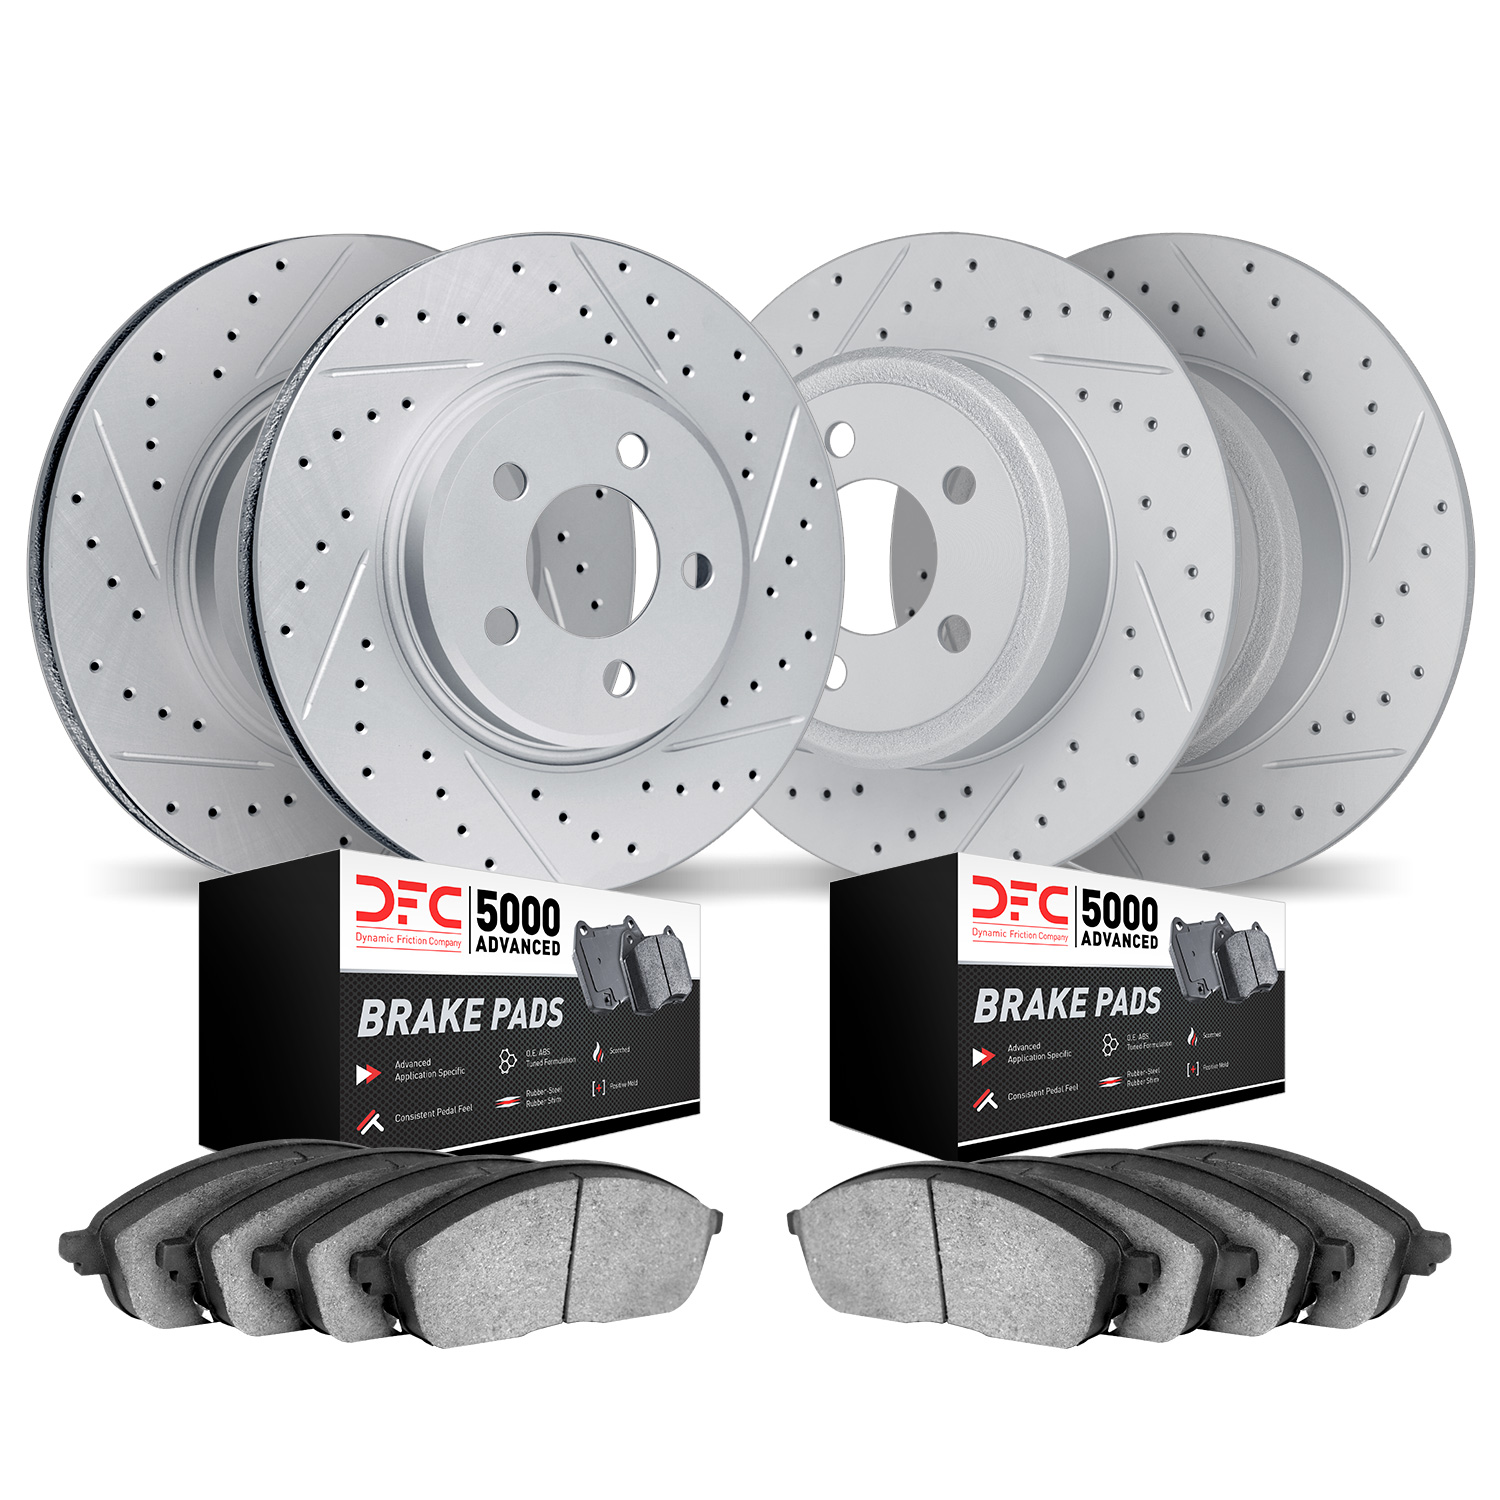 2504-74020 Geoperformance Drilled/Slotted Rotors w/5000 Advanced Brake Pads Kit, 1999-2006 Audi/Volkswagen, Position: Front and